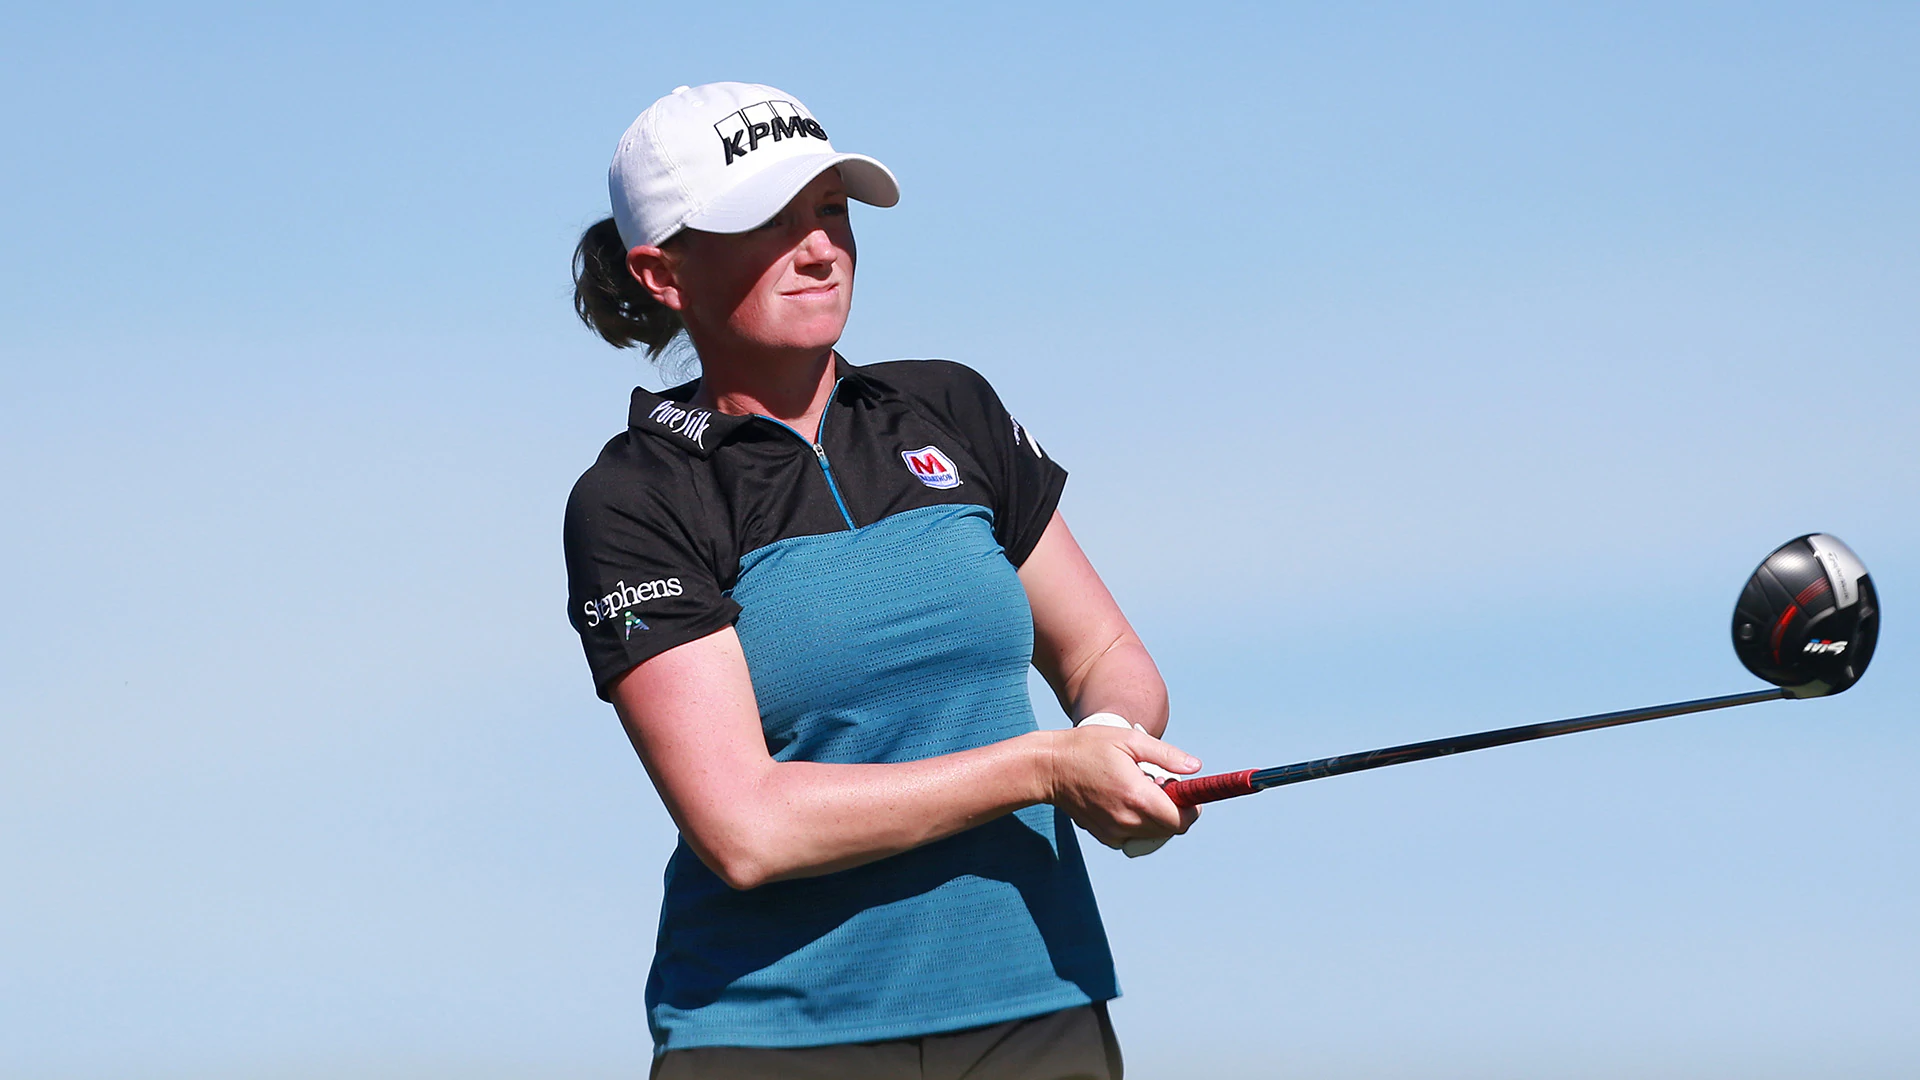 Life as LPGA pro and mom going well so far for Lewis